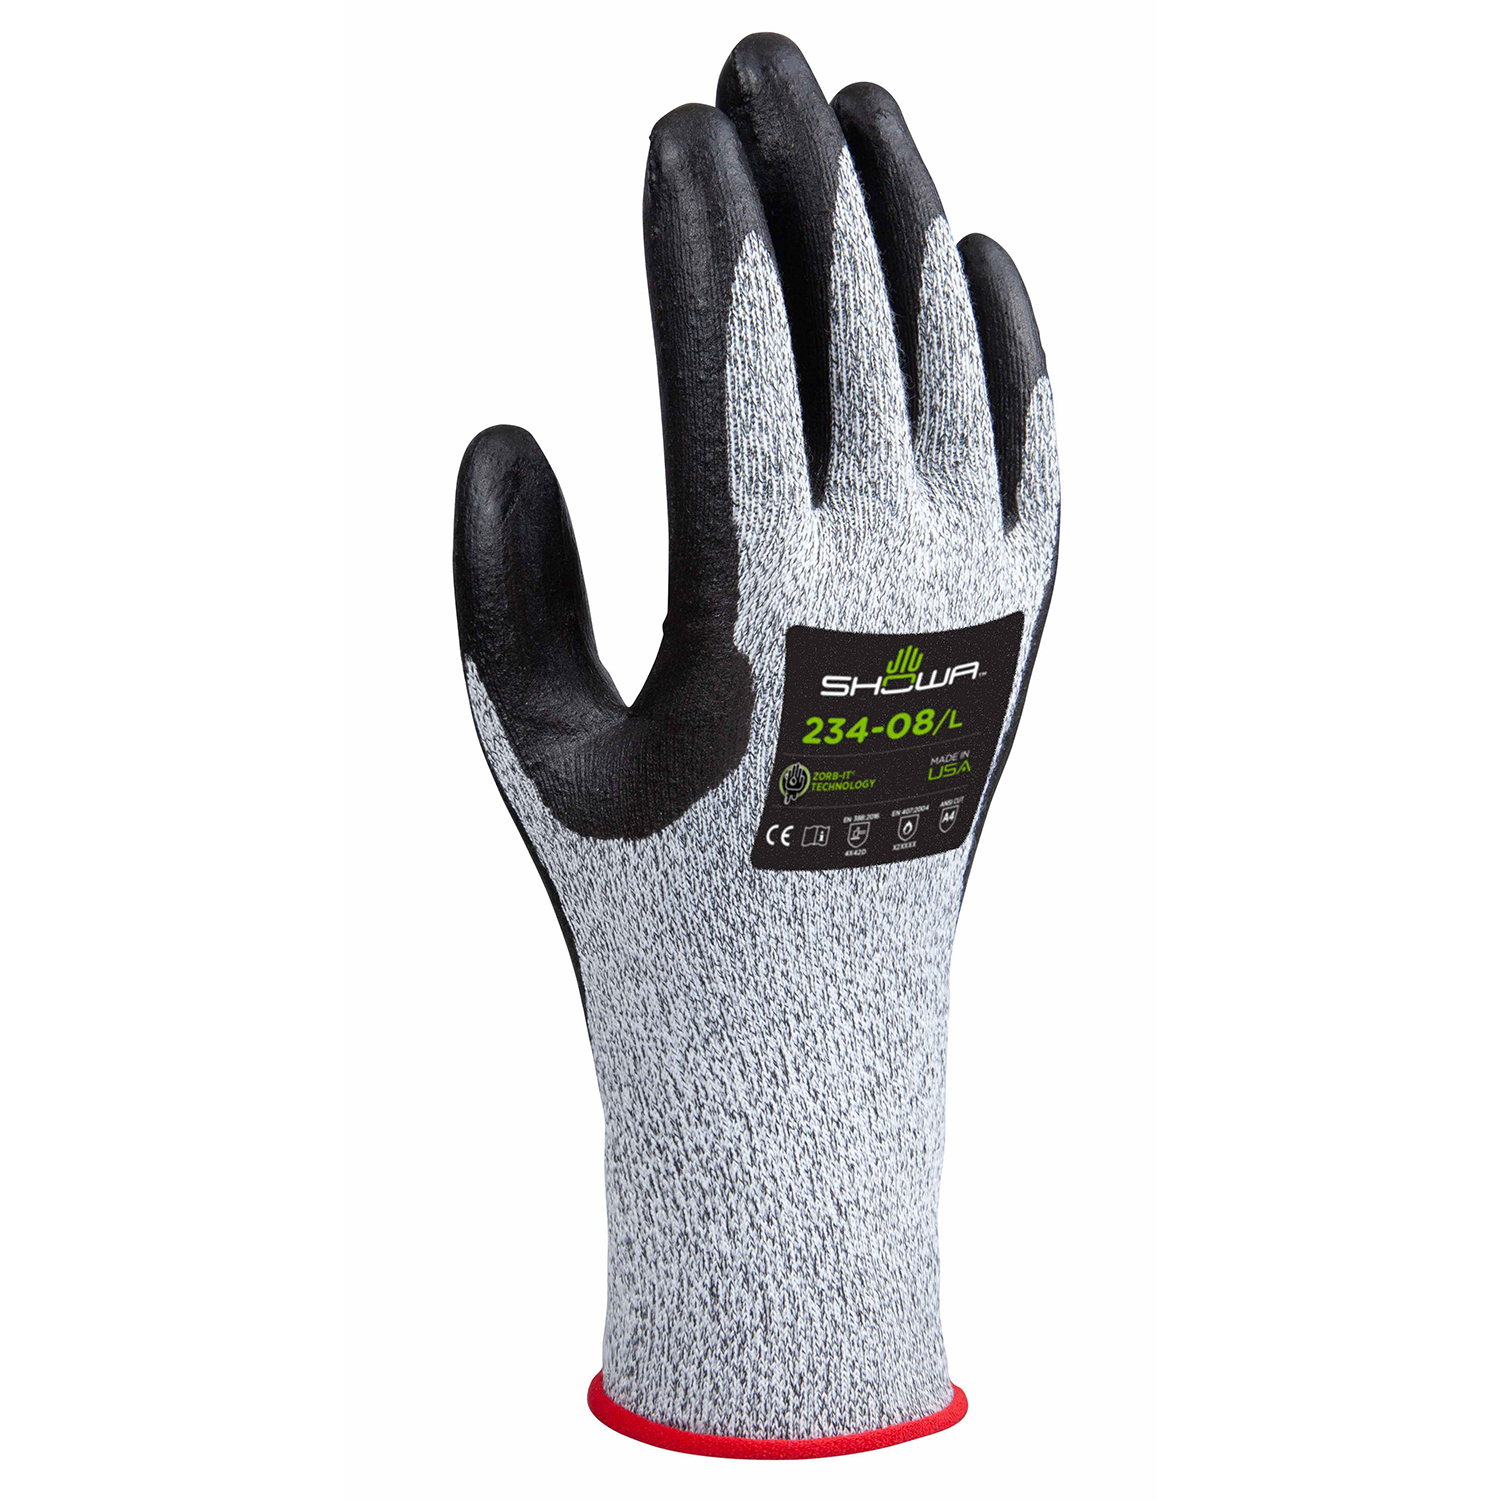 Foam nitrile palm, 15 gauge seamless spandex/engineered cut resistant liner reinforced w/HPPE,  black & white w/gray, ANSI CUT LEVEL A4/large